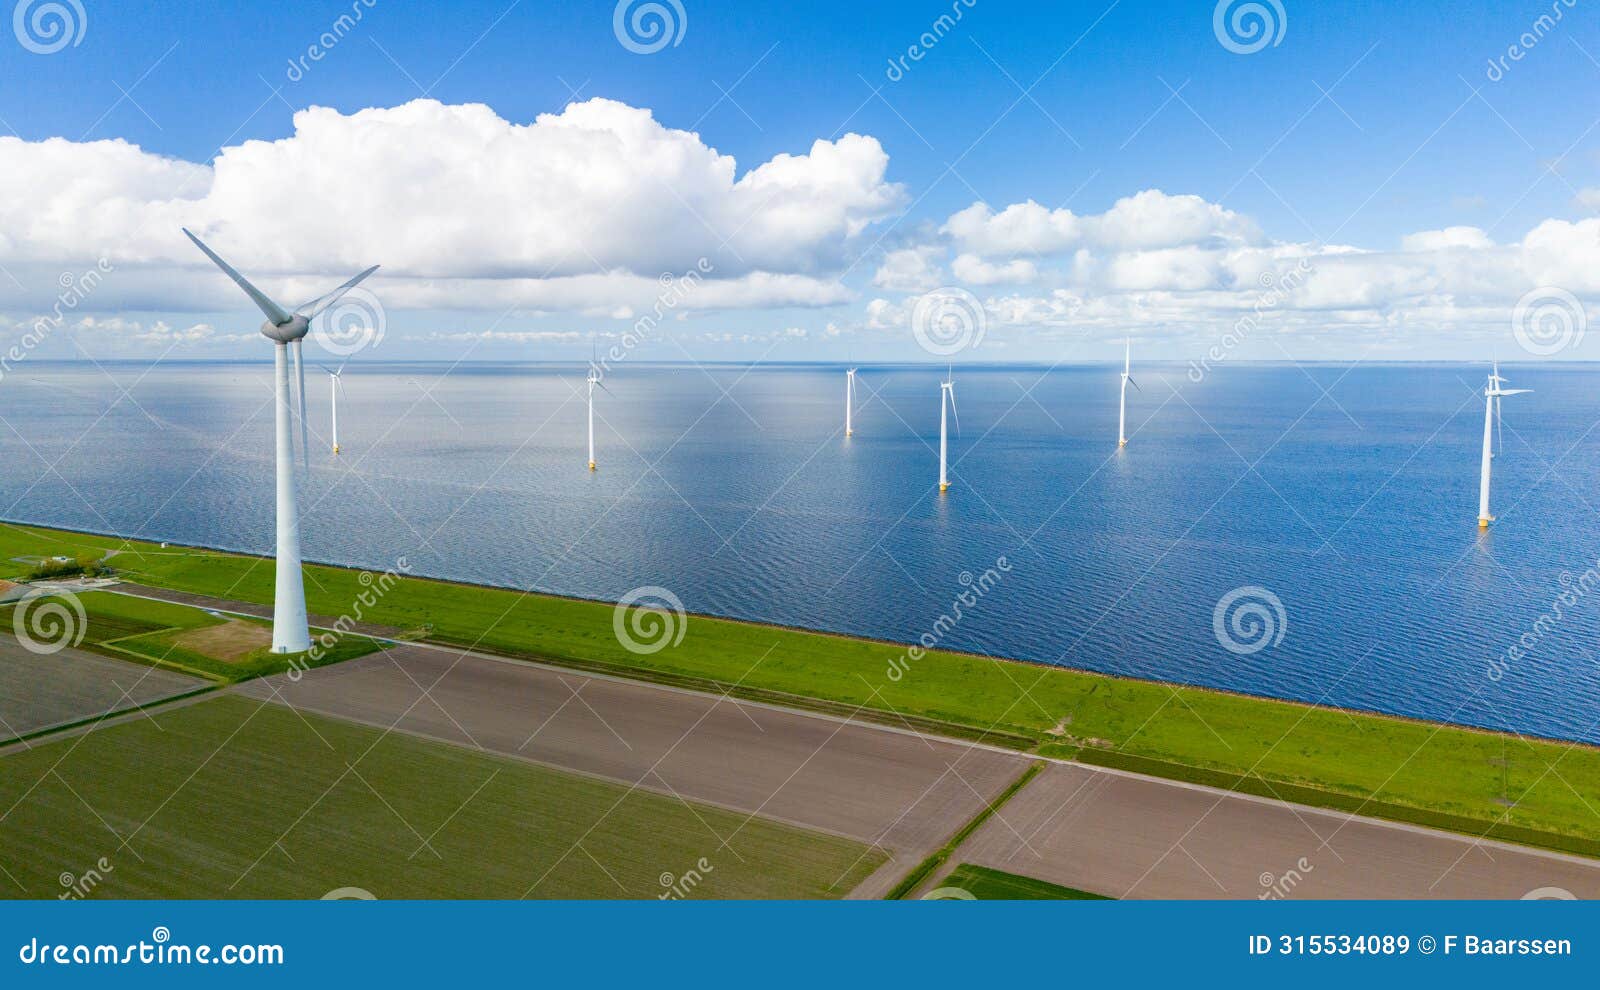 a wind farm filled with turbines rises from the choppy waters of the netherlands, harnessing the power of the wind to